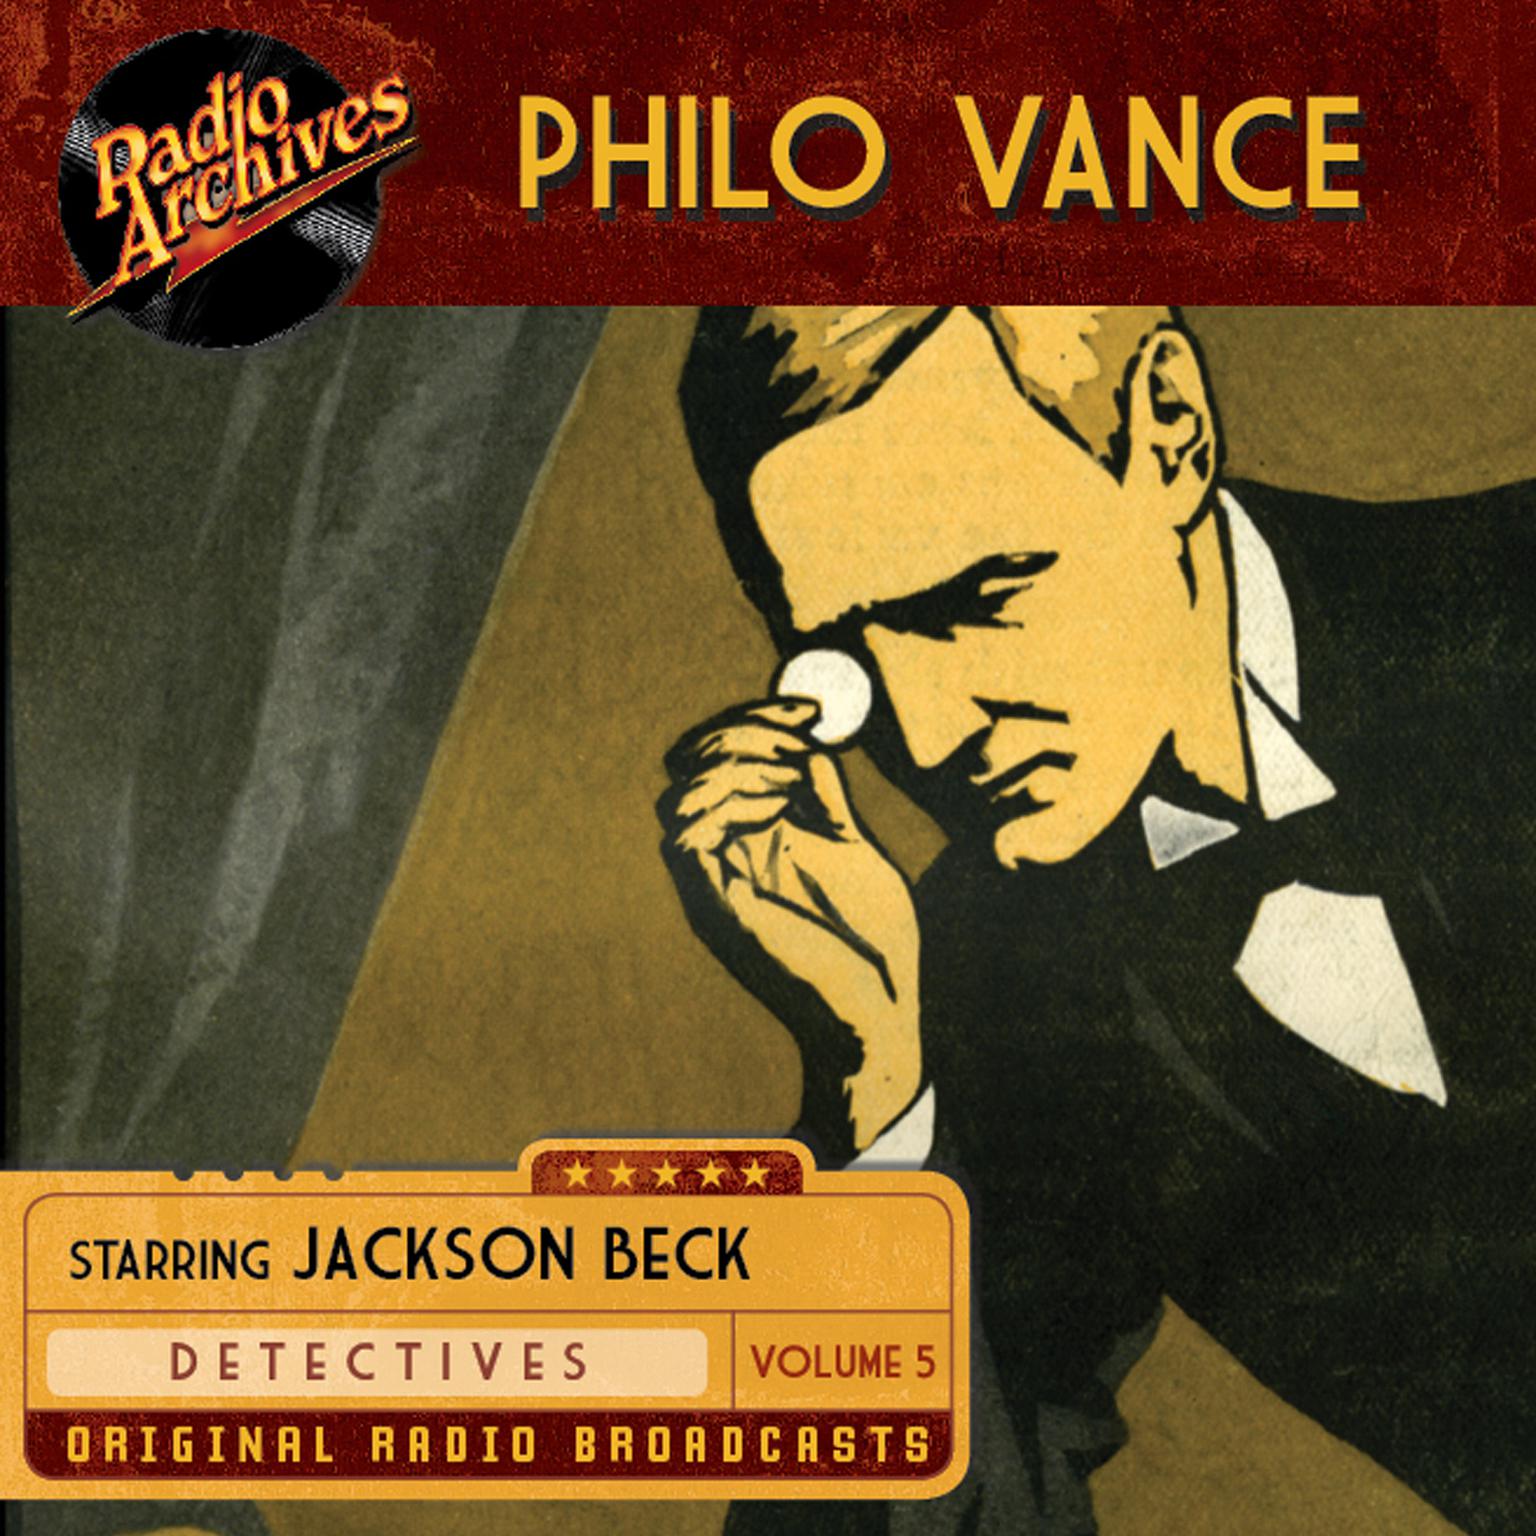 Philo Vance, Vol. 5 Audiobook, by various authors